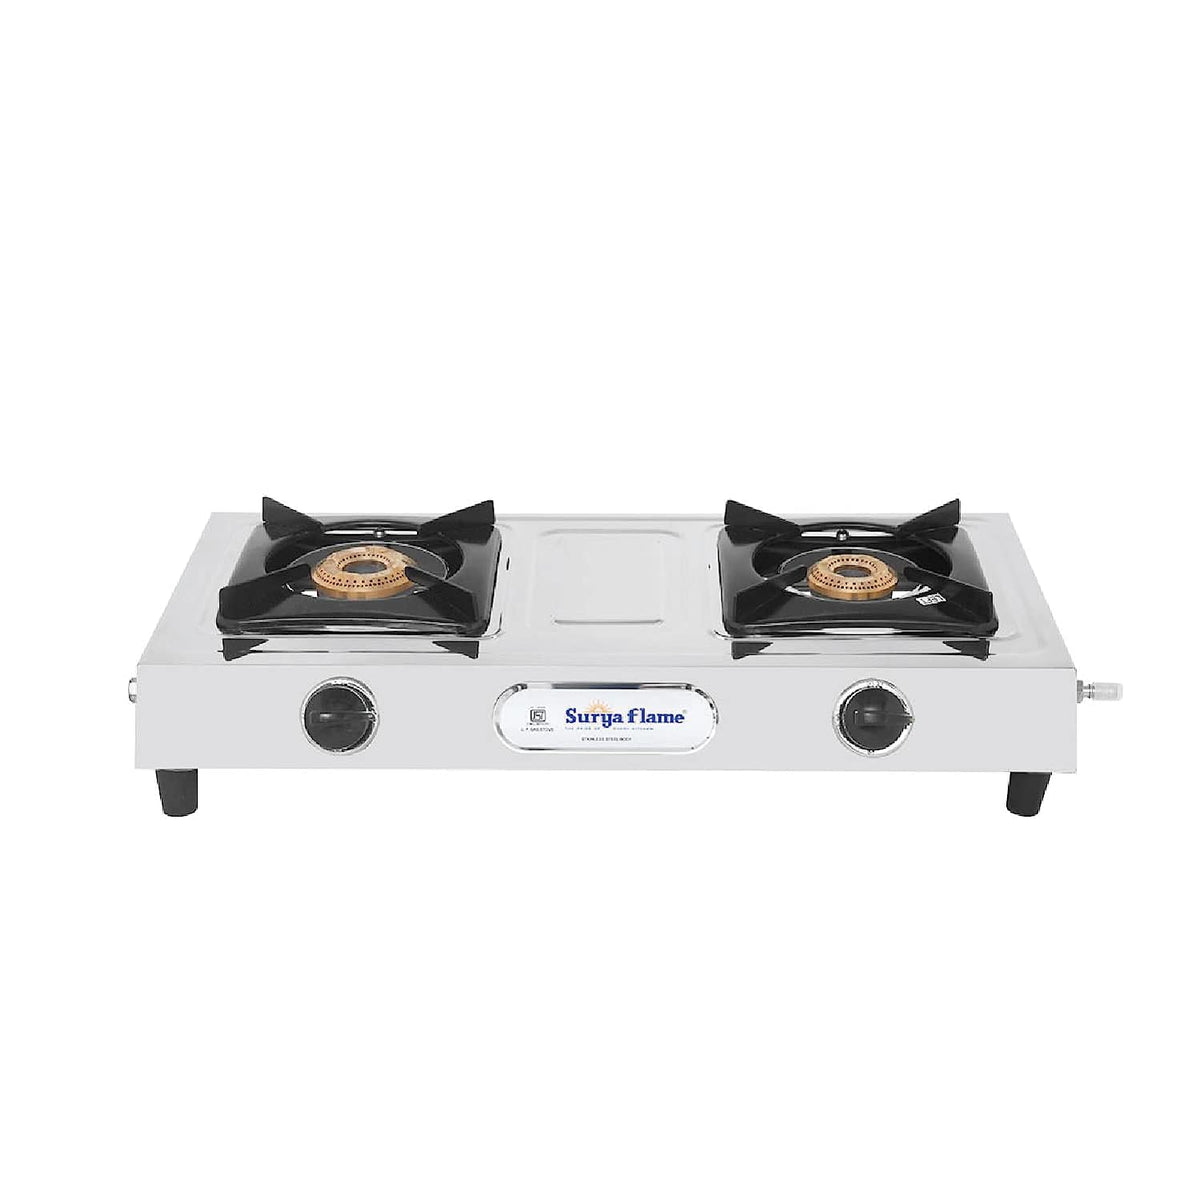 Surya Flame Venus Gas Stove 2 Burners | LPG Stove With Stainless Steel Pan Support | Anti Skid Rubber Legs - 2 Years Complete Doorstep Warranty (SS Body, 2)